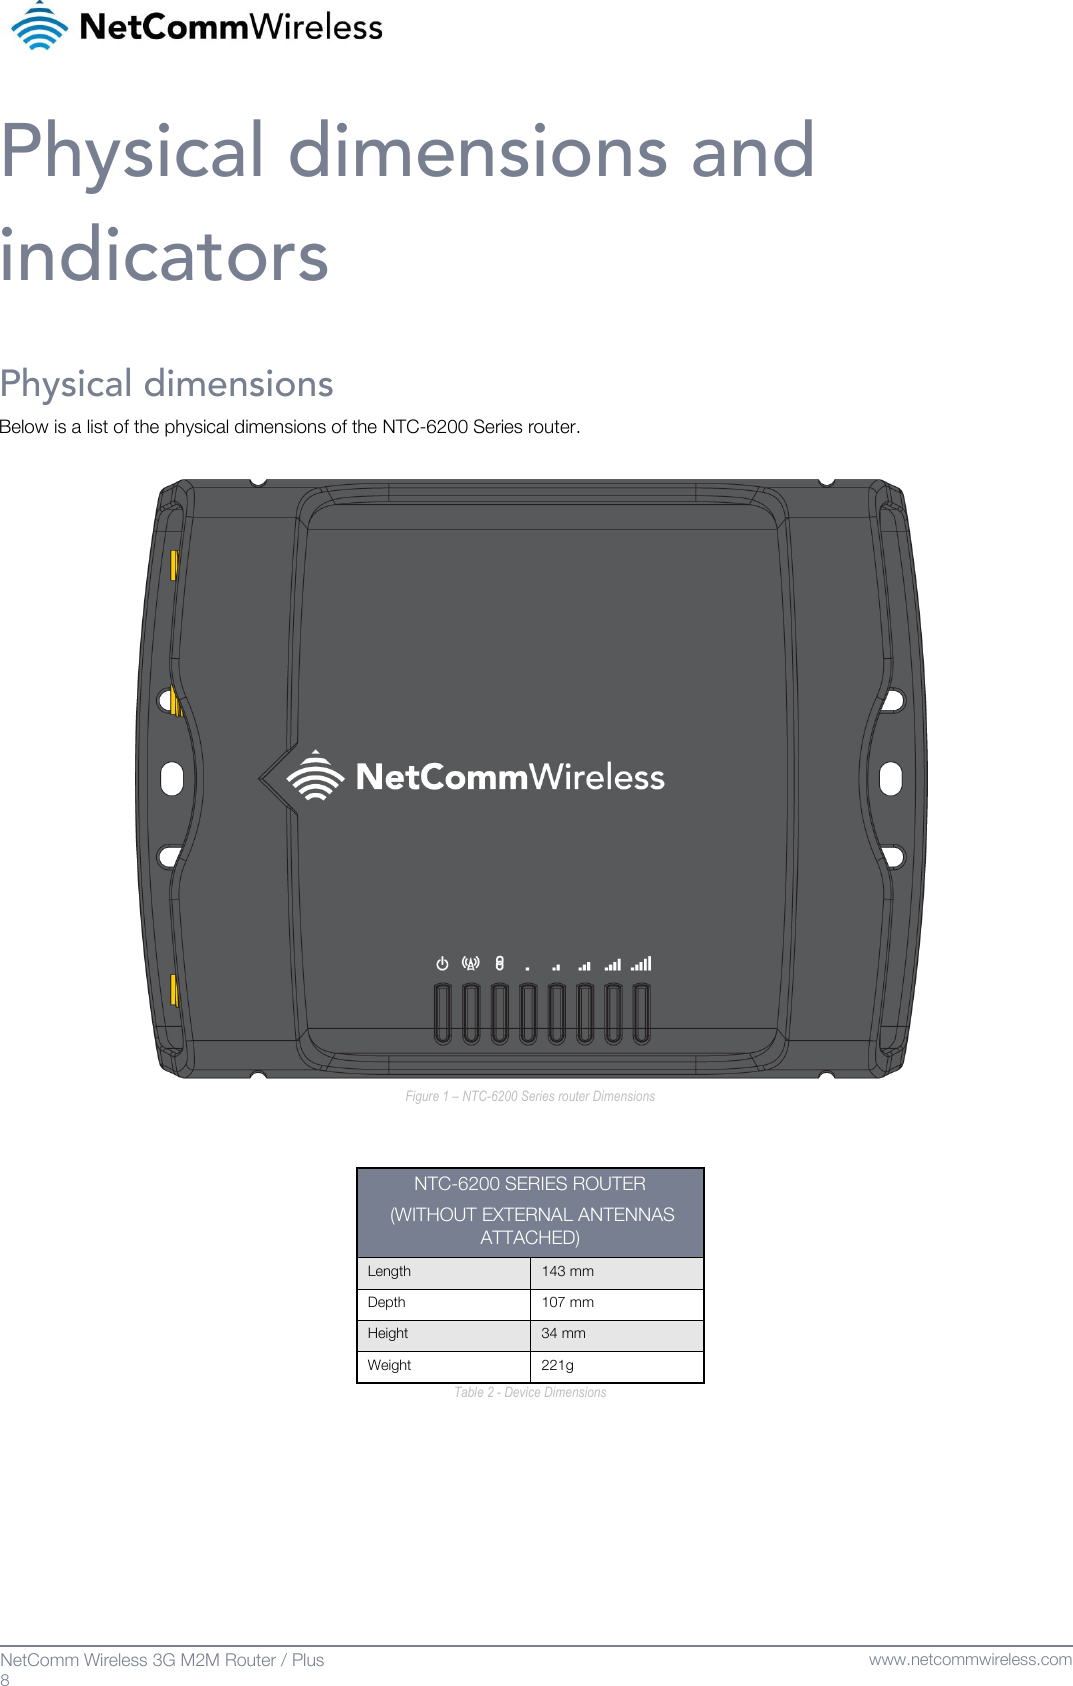   8  NetComm Wireless 3G M2M Router / Plus   www.netcommwireless.com Physical dimensions and indicators Physical dimensions Below is a list of the physical dimensions of the NTC-6200 Series router.   Figure 1 – NTC-6200 Series router Dimensions   NTC-6200 SERIES ROUTER  (WITHOUT EXTERNAL ANTENNAS ATTACHED) Length 143 mm Depth 107 mm Height 34 mm Weight 221g Table 2 - Device Dimensions    